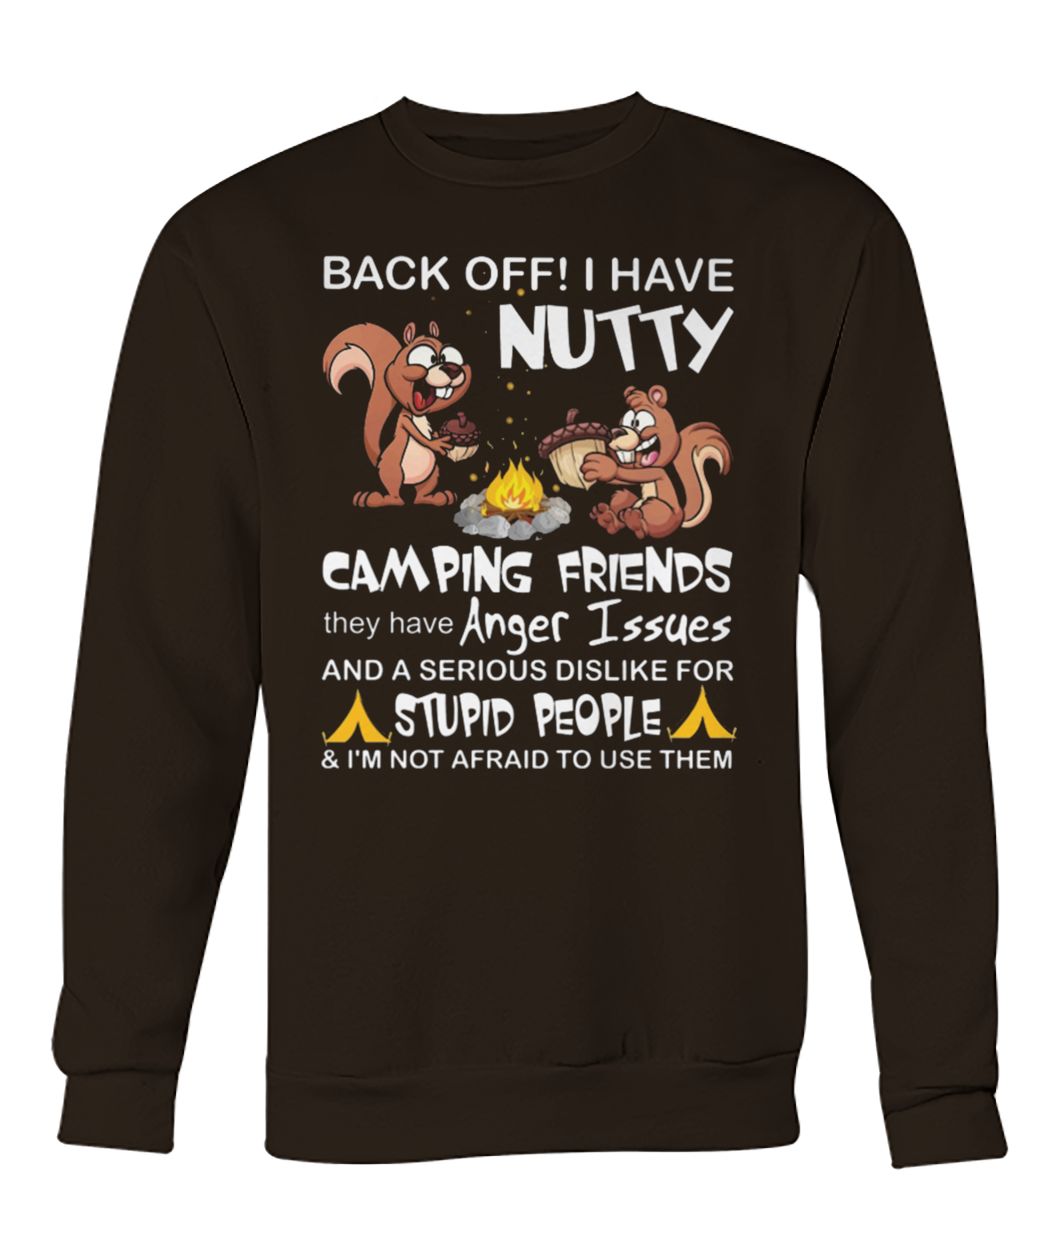 Squirrels back off I have nutty camping friends crew neck sweatshirt